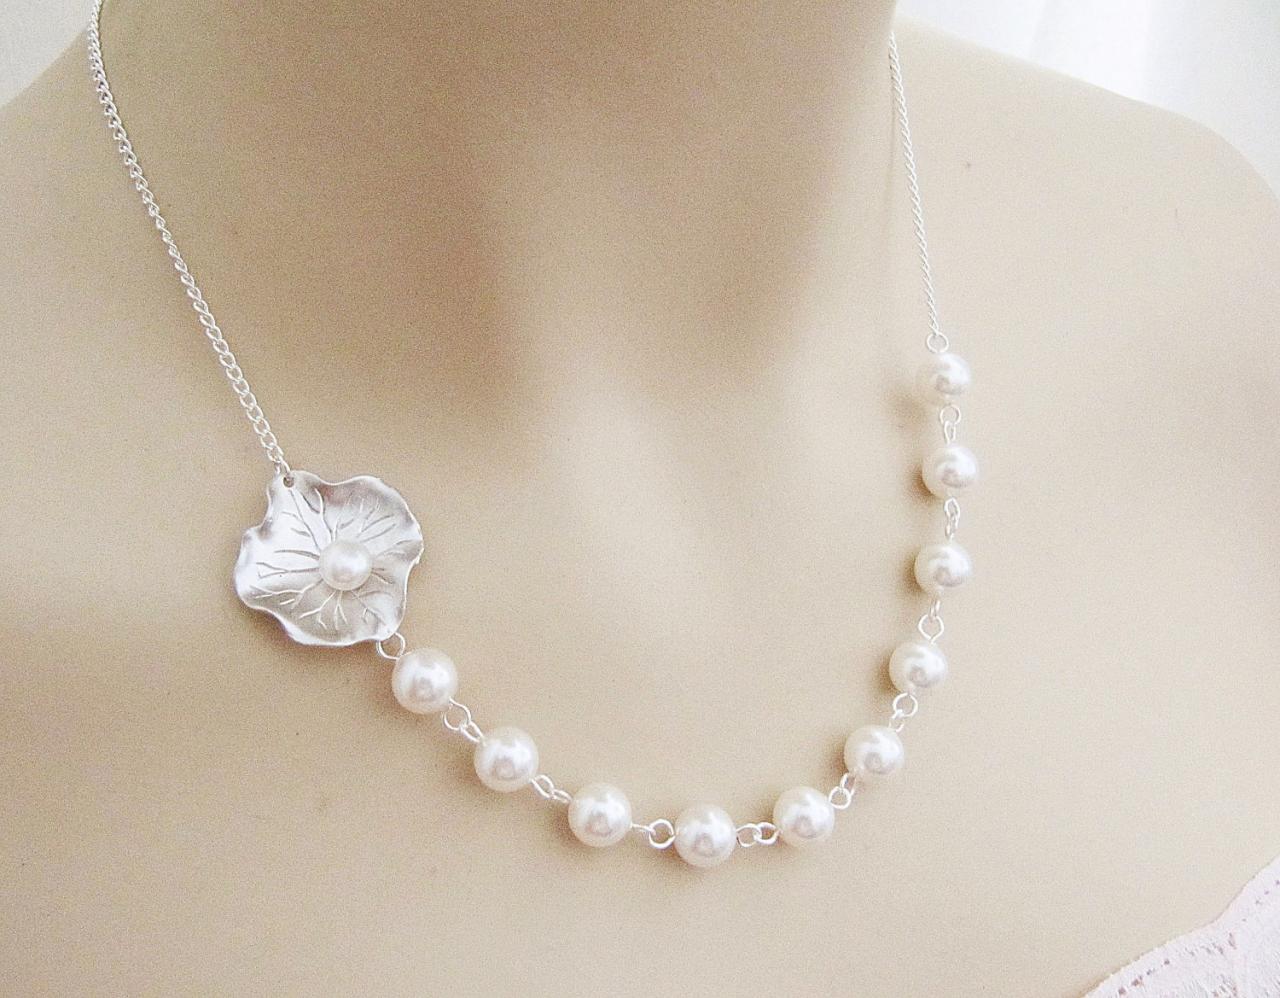 Bridal Necklace Bridesmaid Necklace Matte Rodium Finish Lotus Leaf Charm With Fresh Water Pearl And Crystal White Swarovski Pearls Necklace